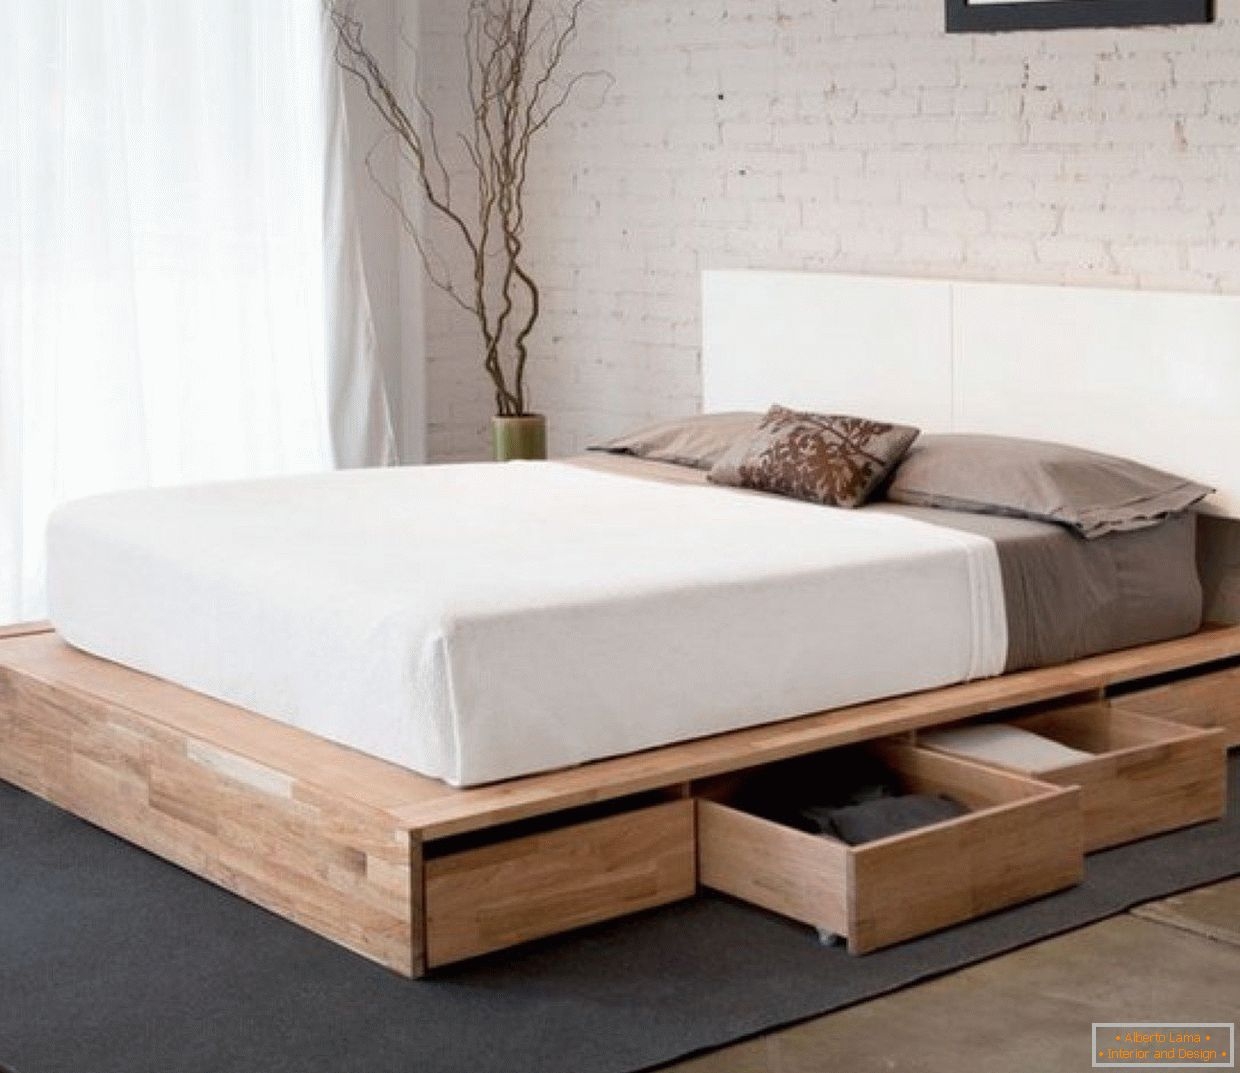 Bed With Drawers Underneath Visualhunt, Twin Size Bed Frame With Storage Underneath